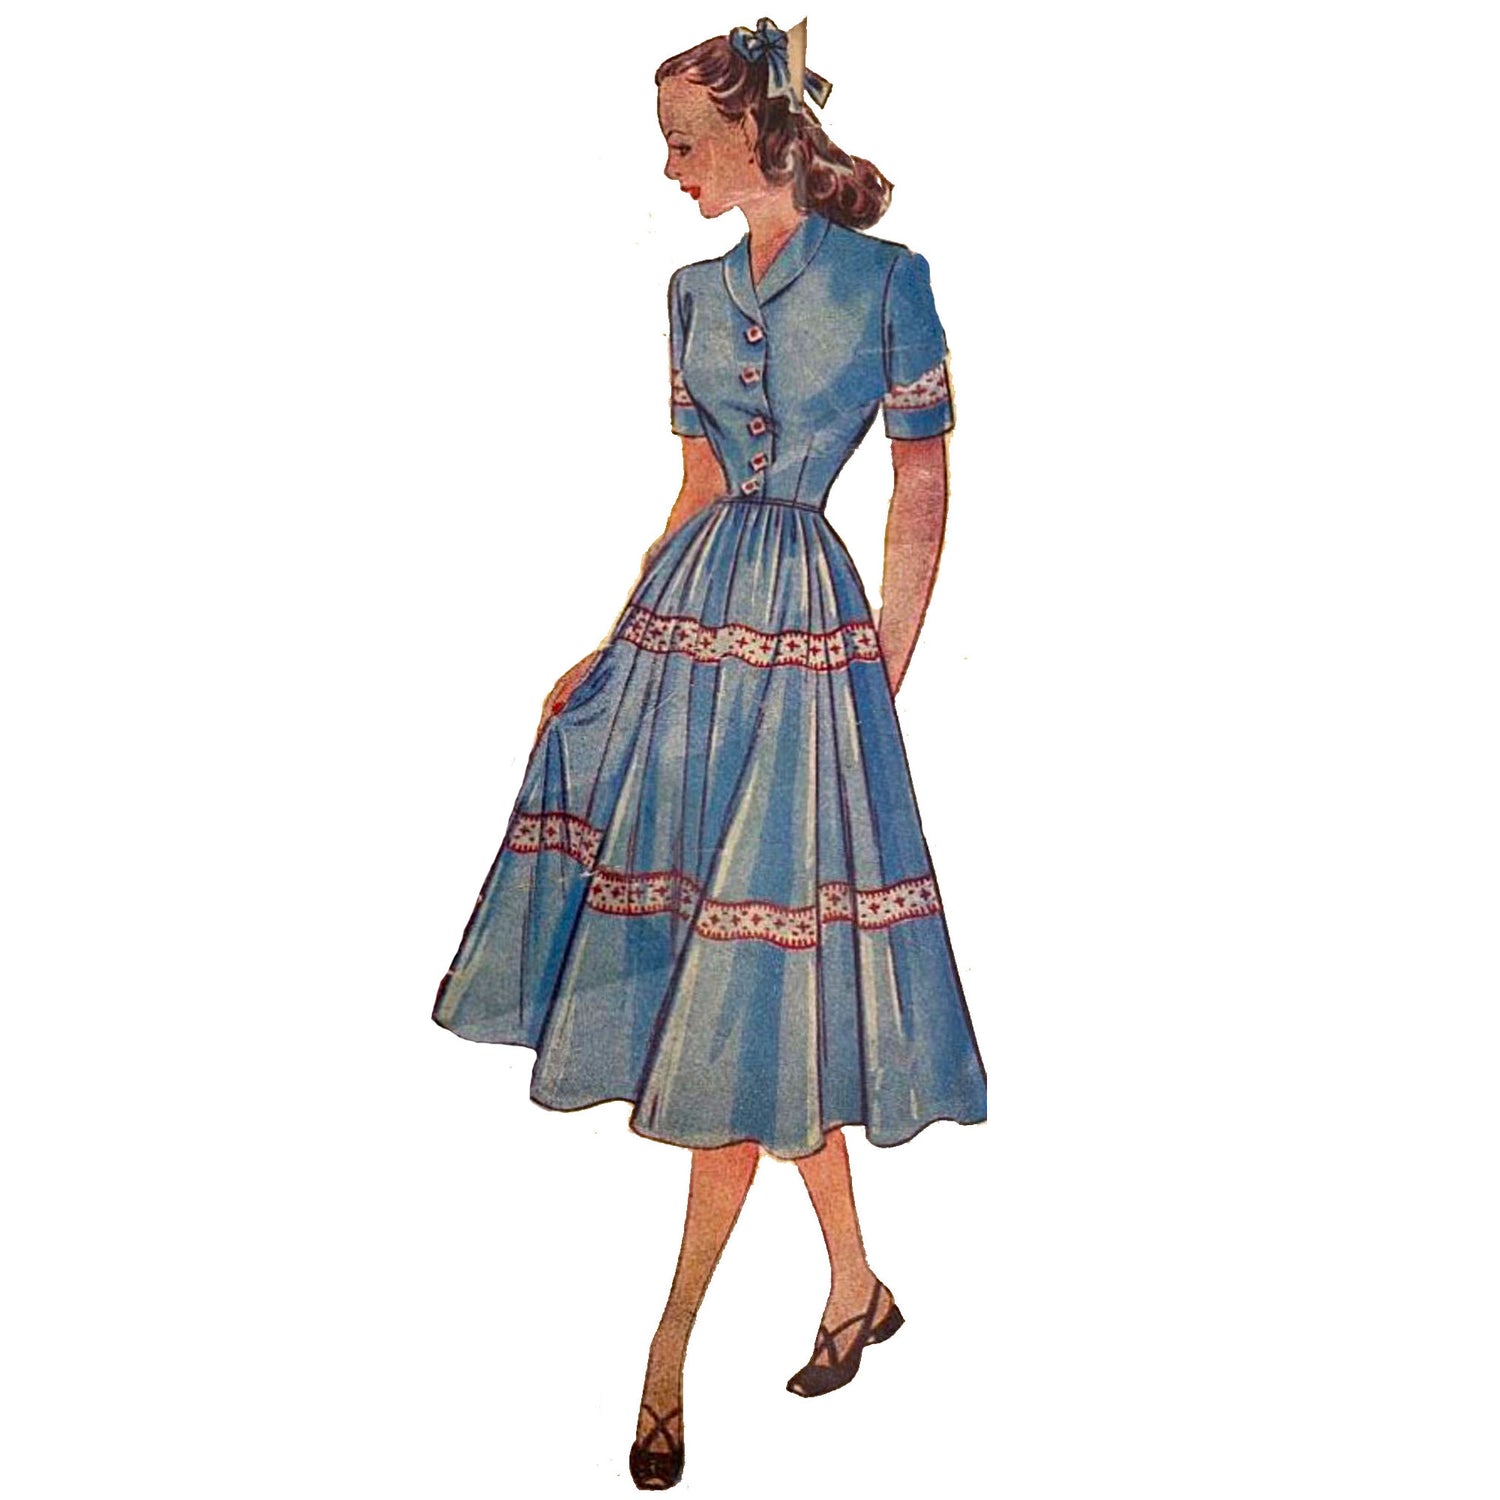 Model wearing 1940s dress made from Economy Design E197 pattern